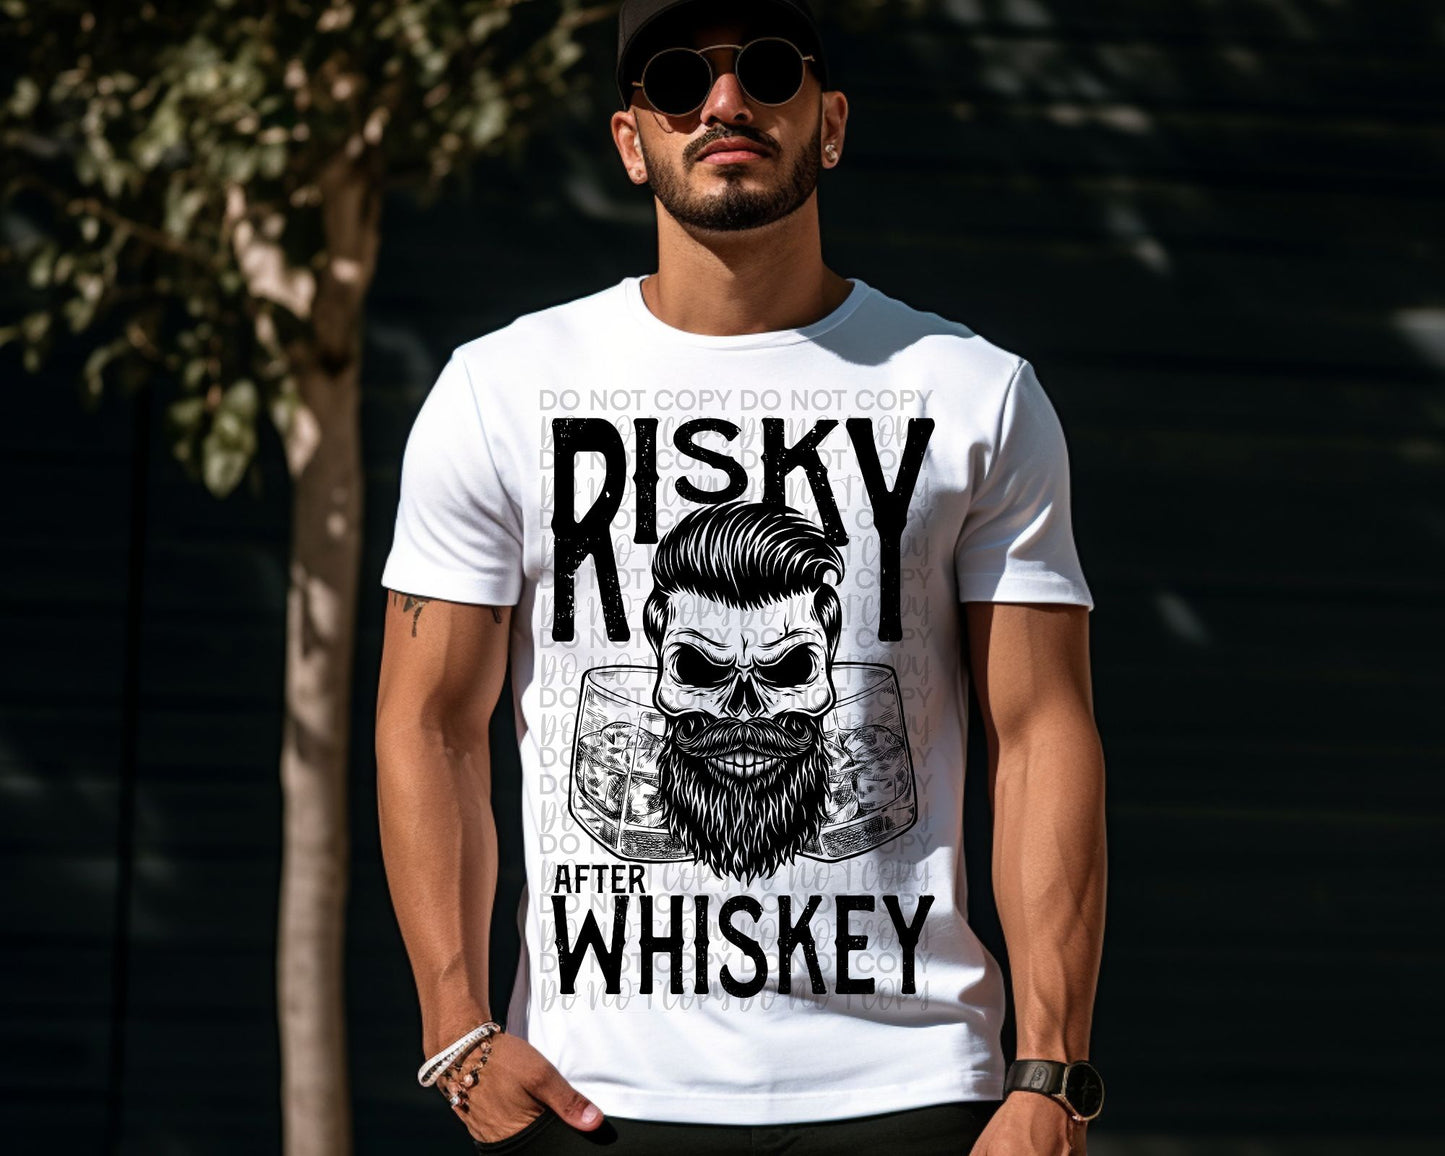 Risky after Whiskey